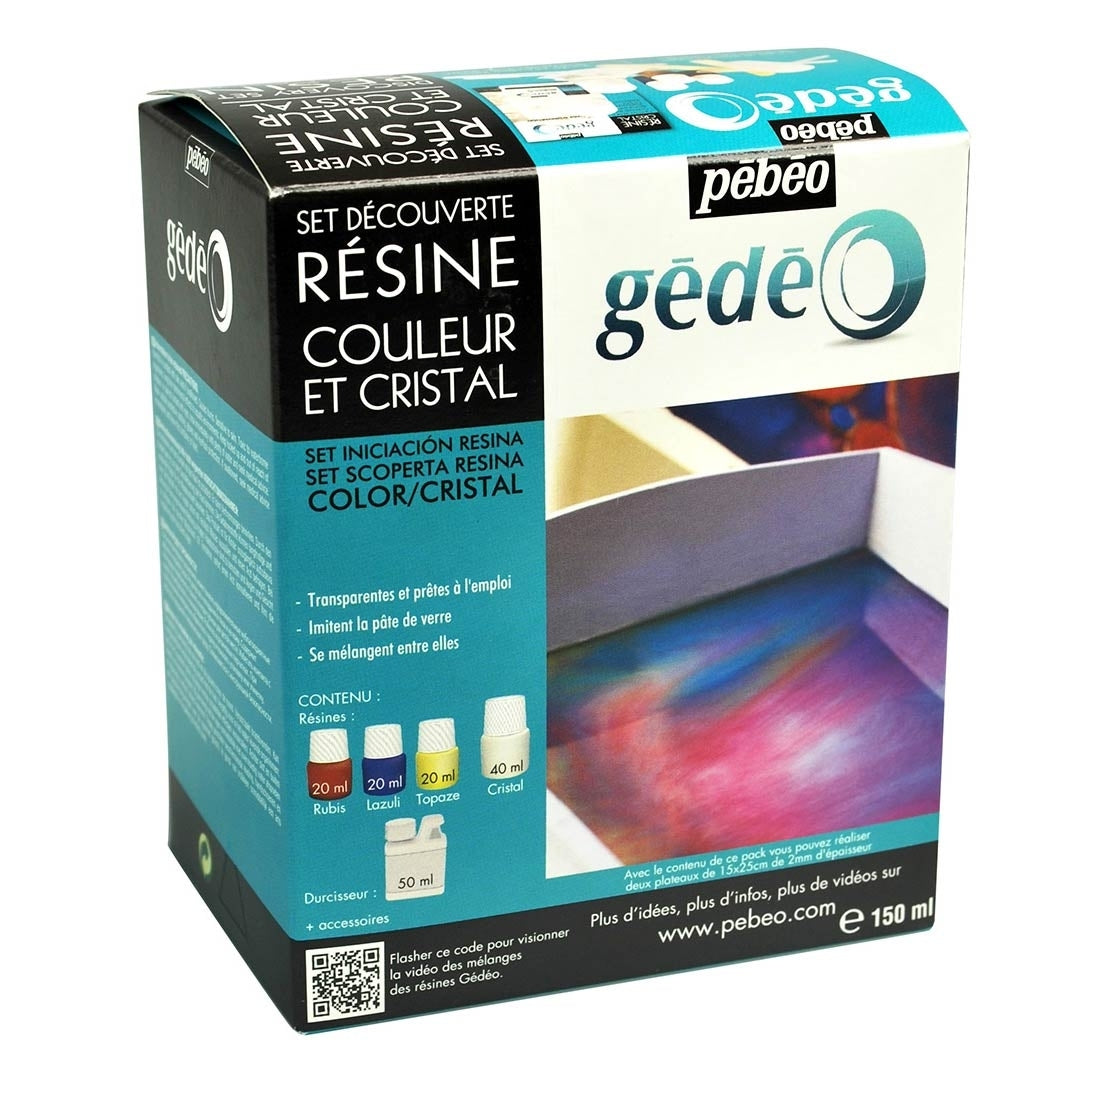 Resin Art  A Trending Paint Medium With A Gorgeous Finish